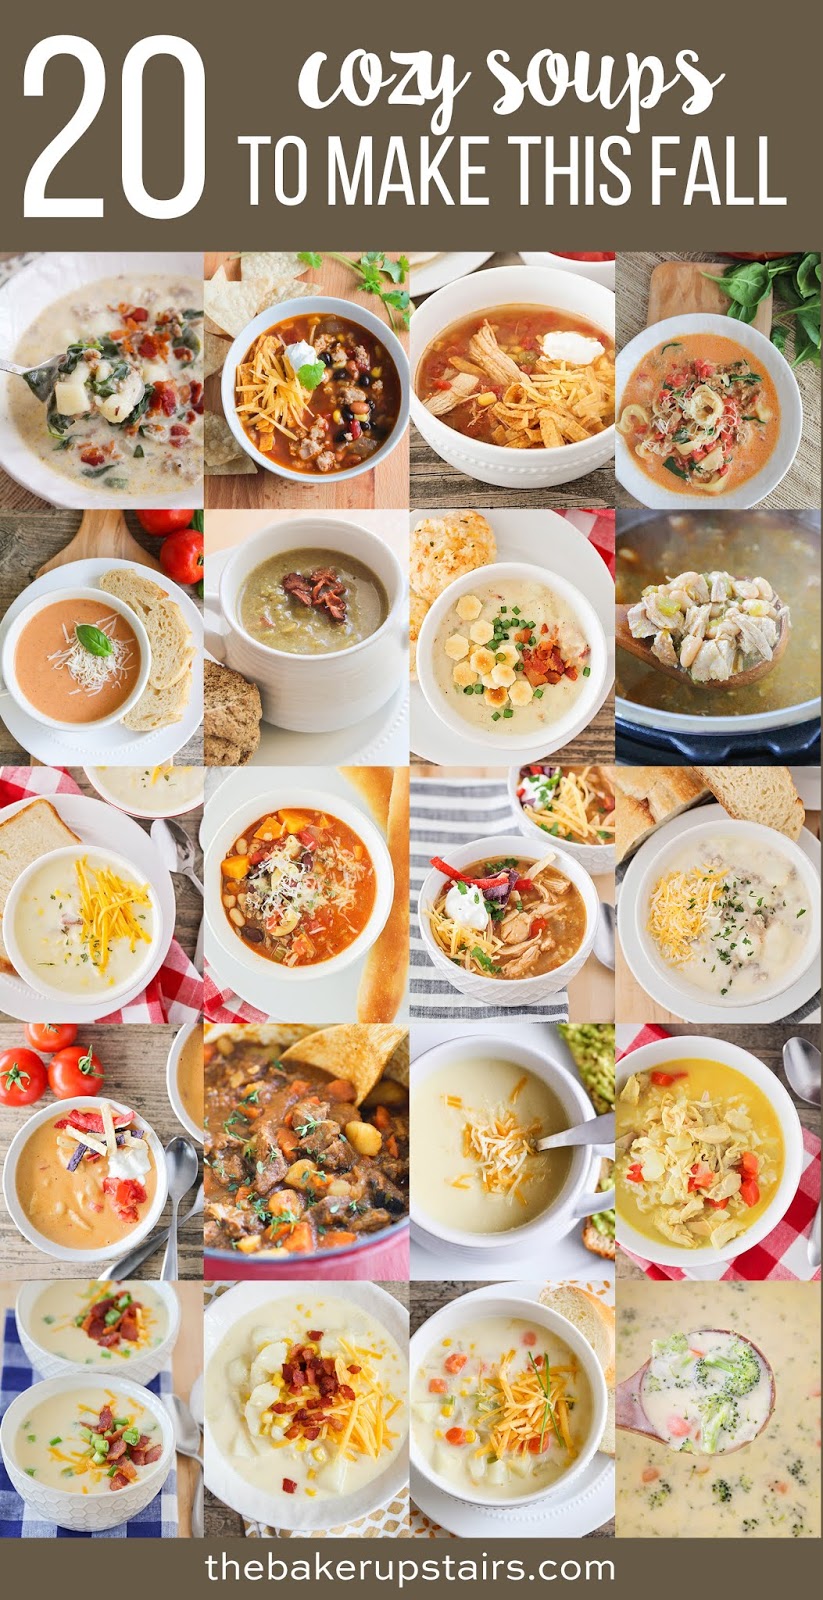 20 cozy soups to make this fall - a delicious collection of hearty and cozy soup recipes to warm up the season!